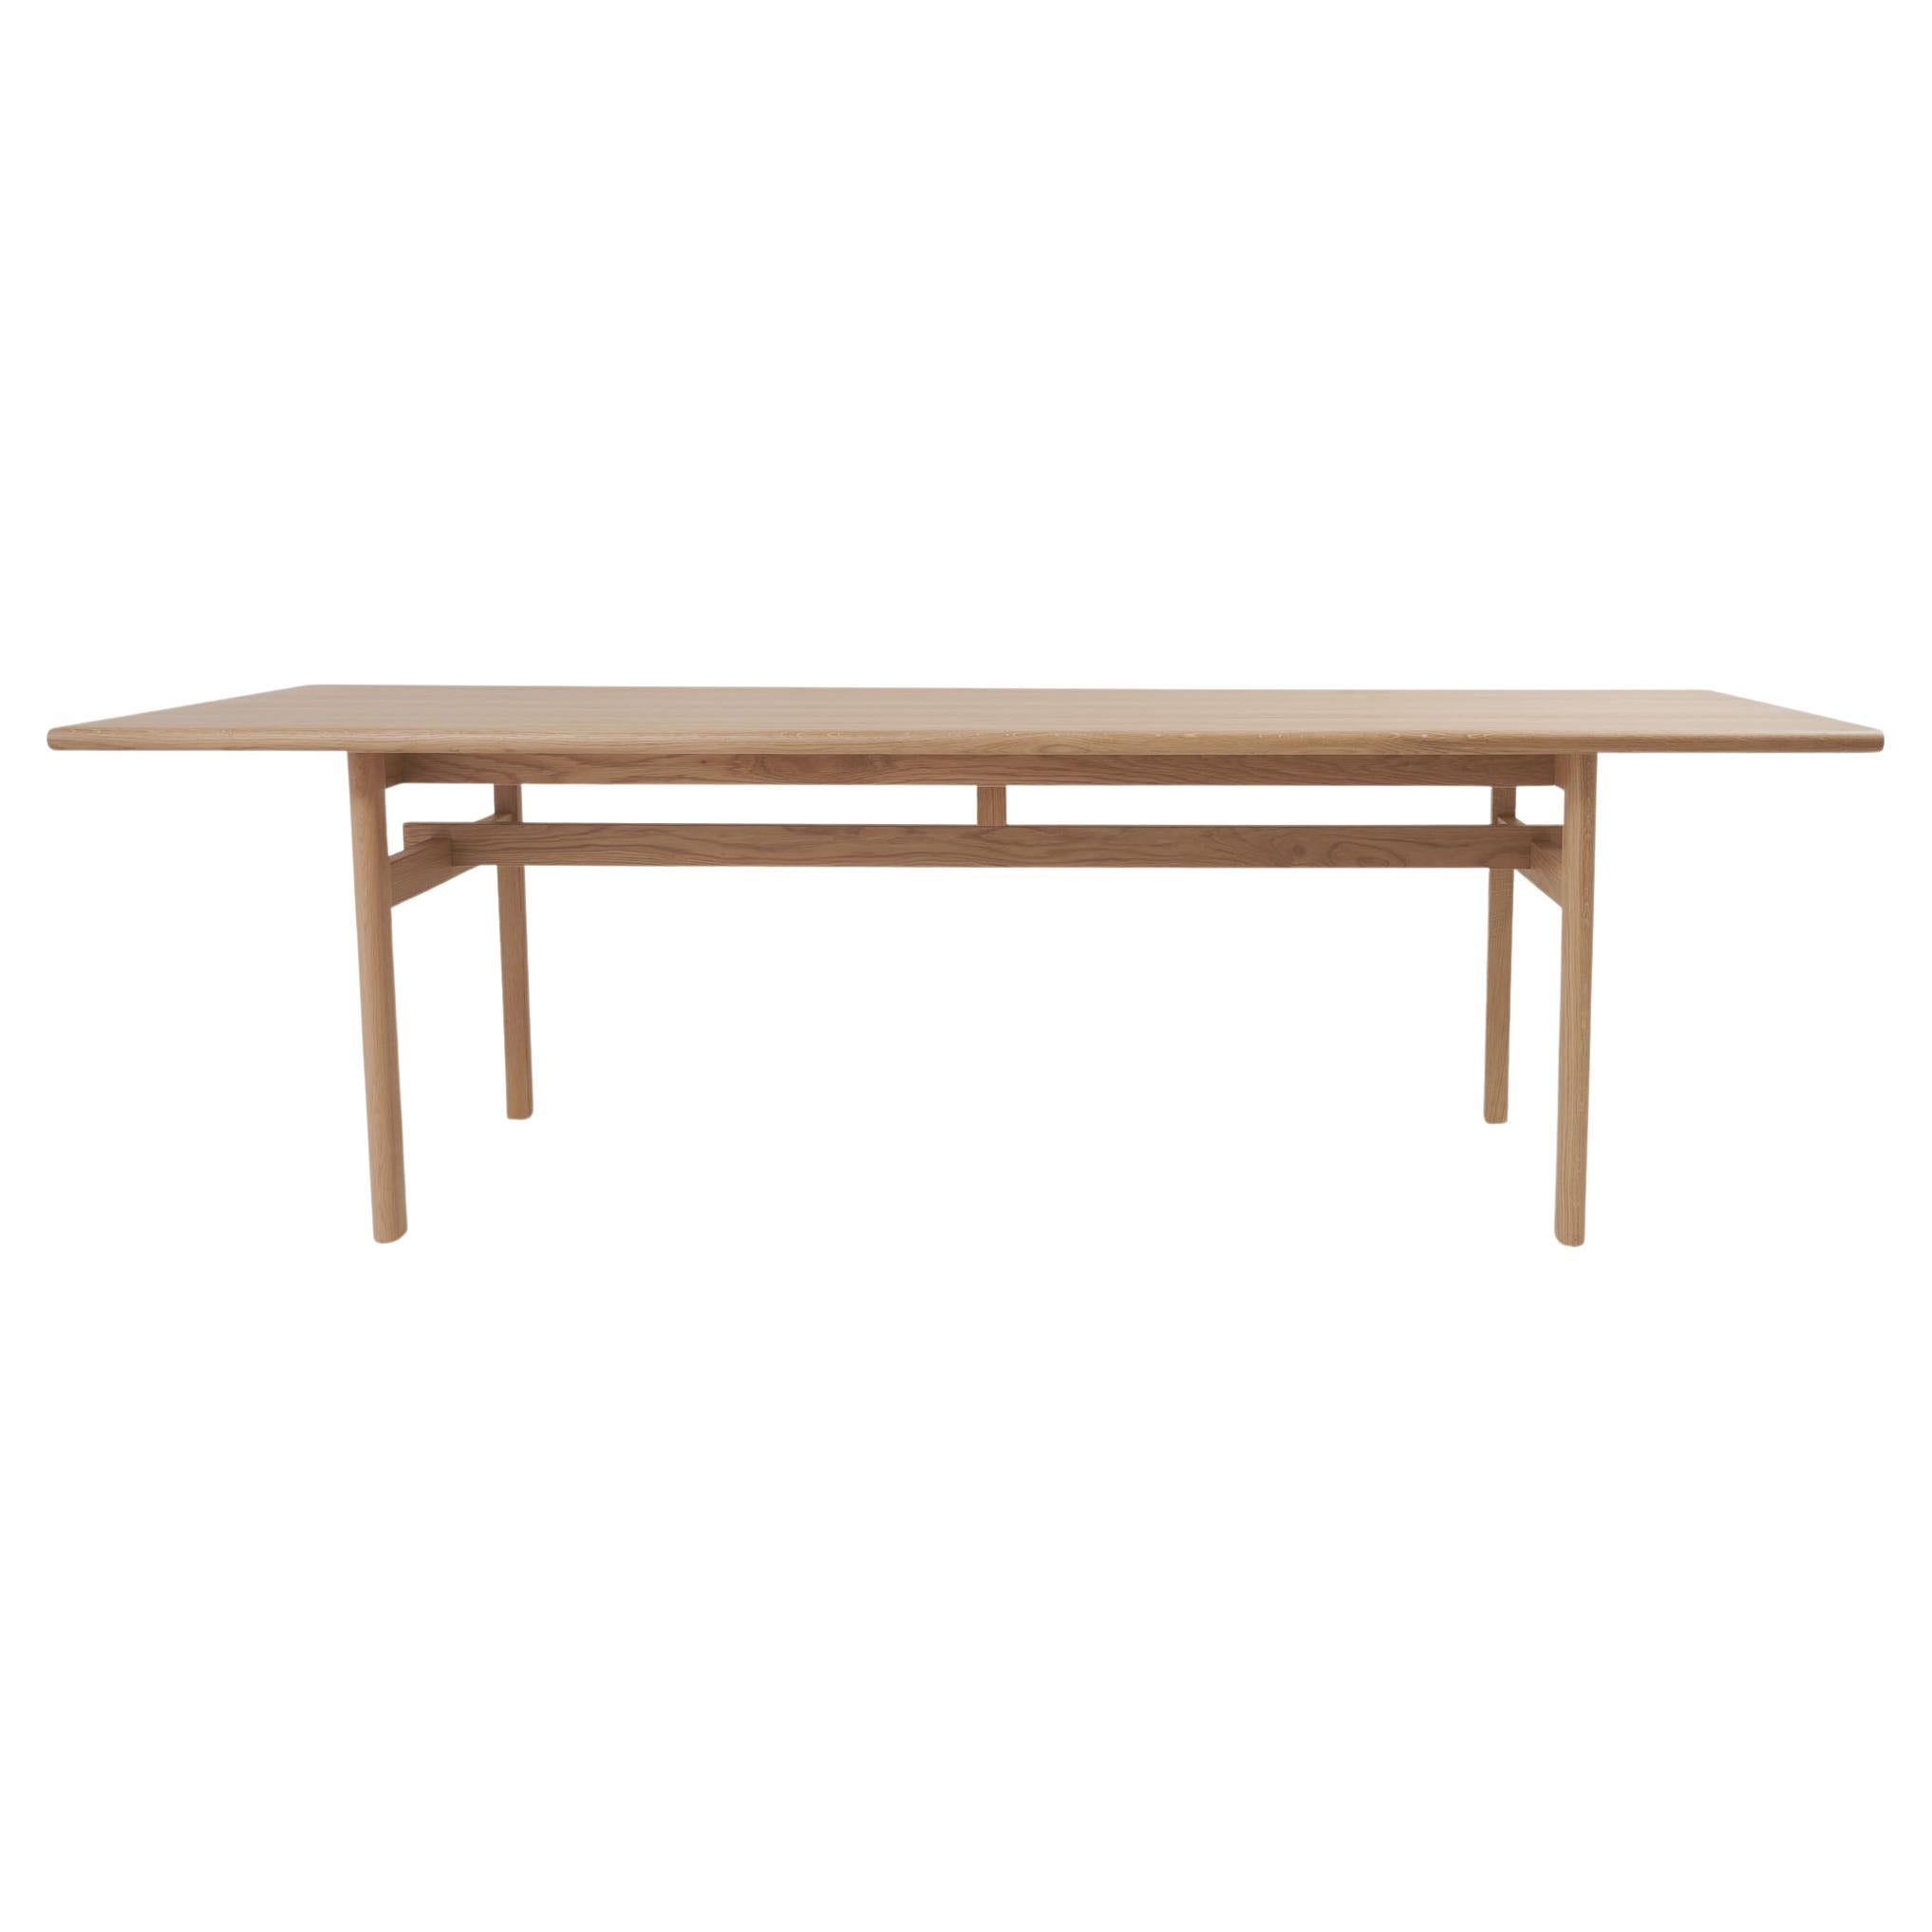 Schumacher Editions Mokki 94.5" Extra Wide Dining Table in White Oak